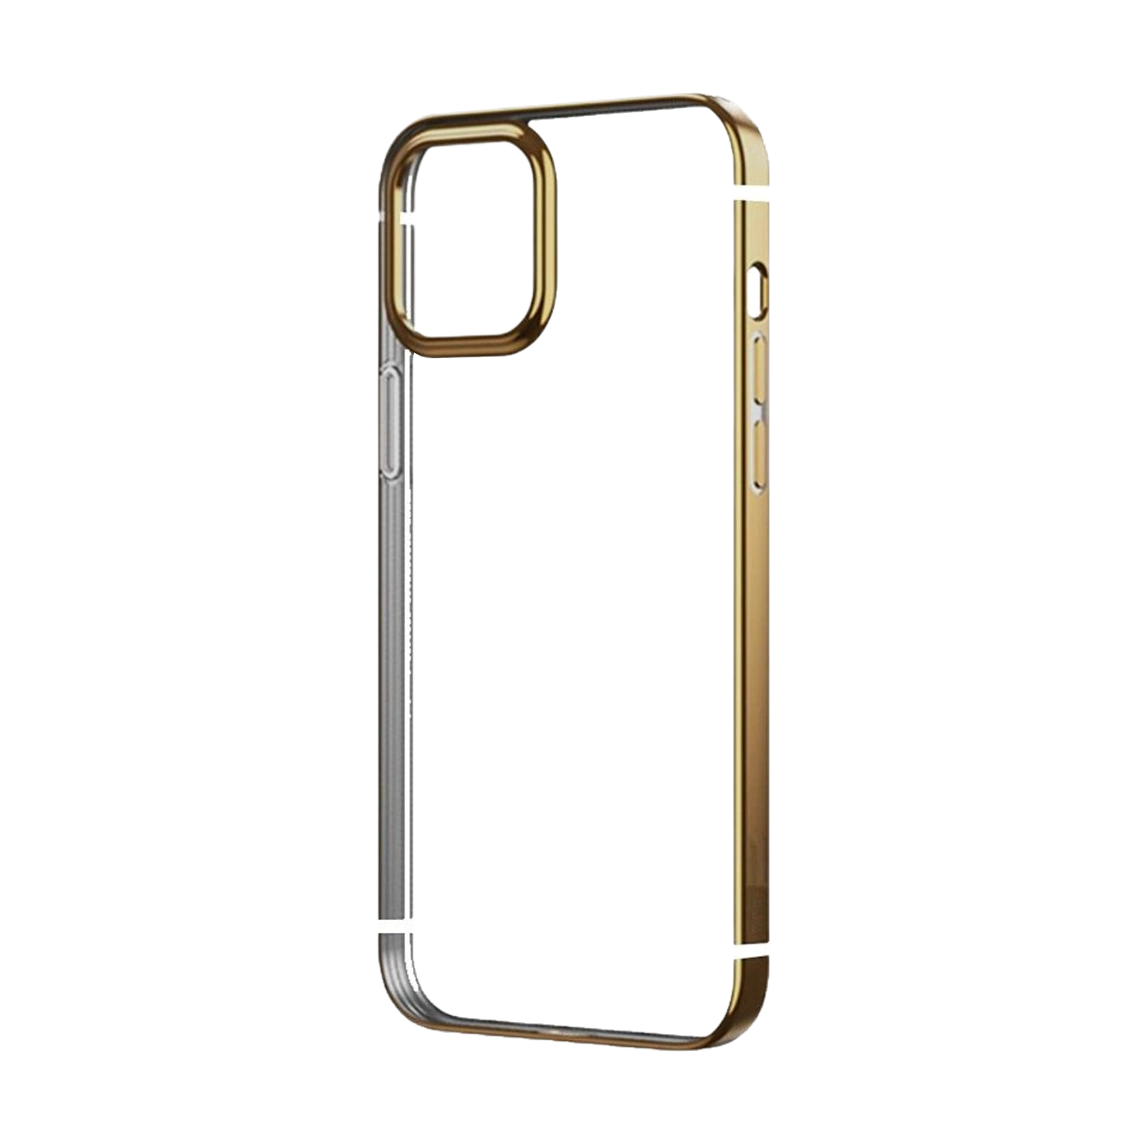 Mutural Case for iPhone 12 Pro